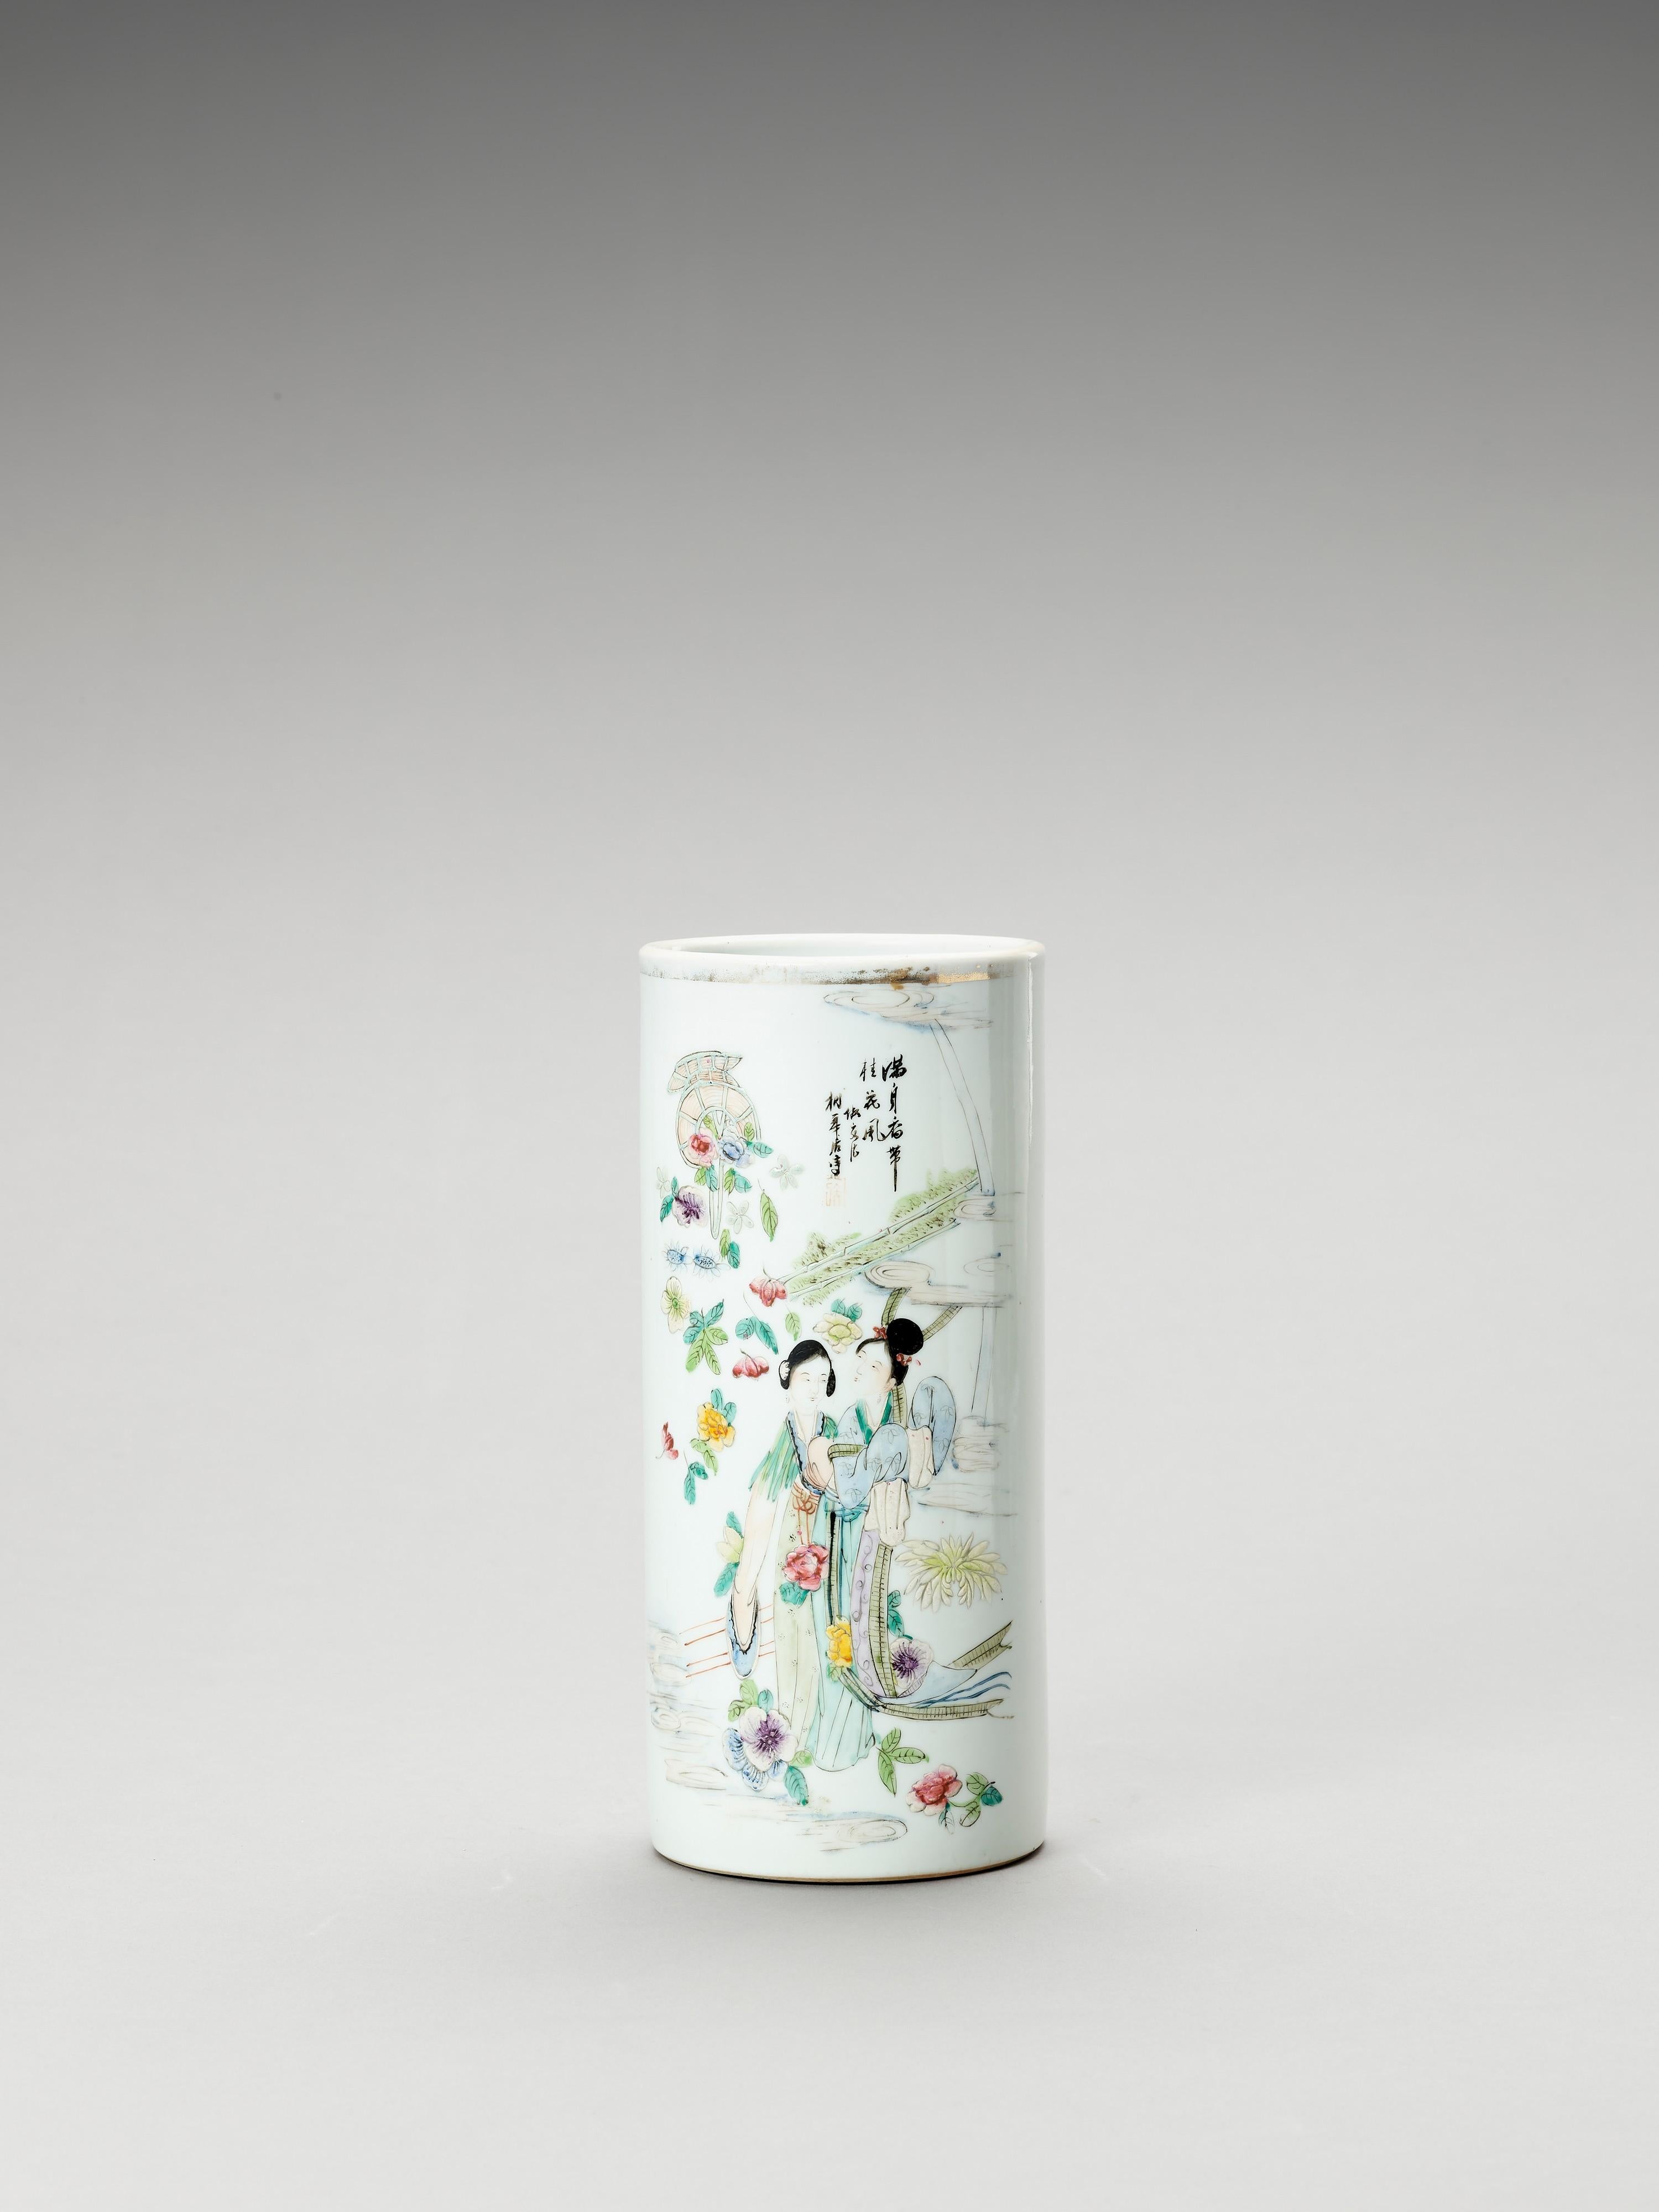 Chinese Enameled Cylindrical porcelain vase, 1900-1920

The tall, cylindrical vase is delicately painted with polychrome enamels showing two court ladies in a garden landscape as well as calligraphy and an artist signature. Apocryphal